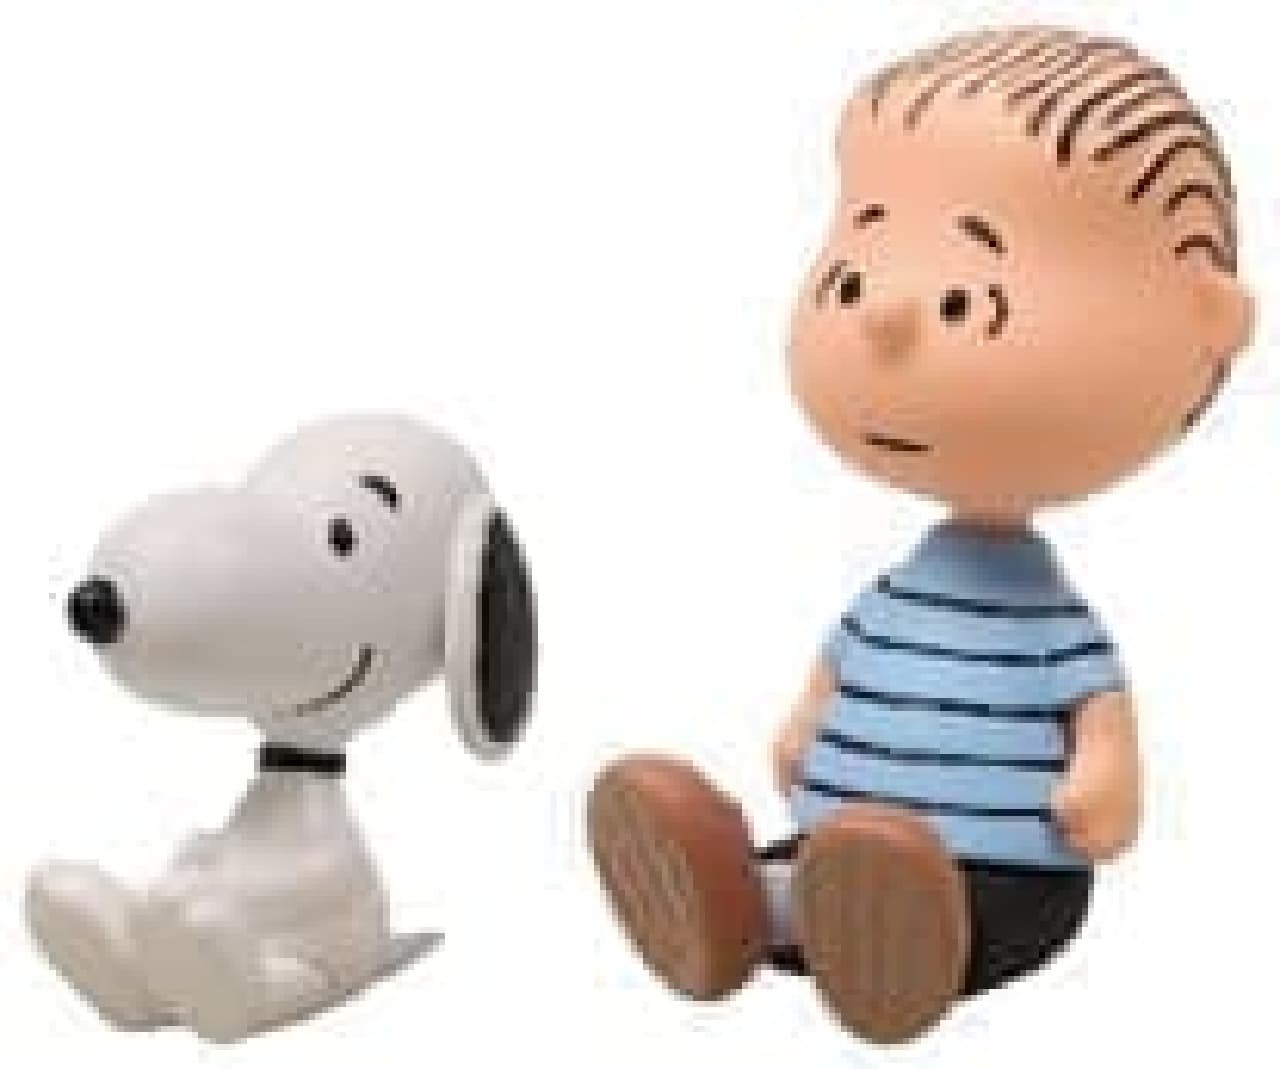 Weekly "Snoopy & Friends to make and collect"